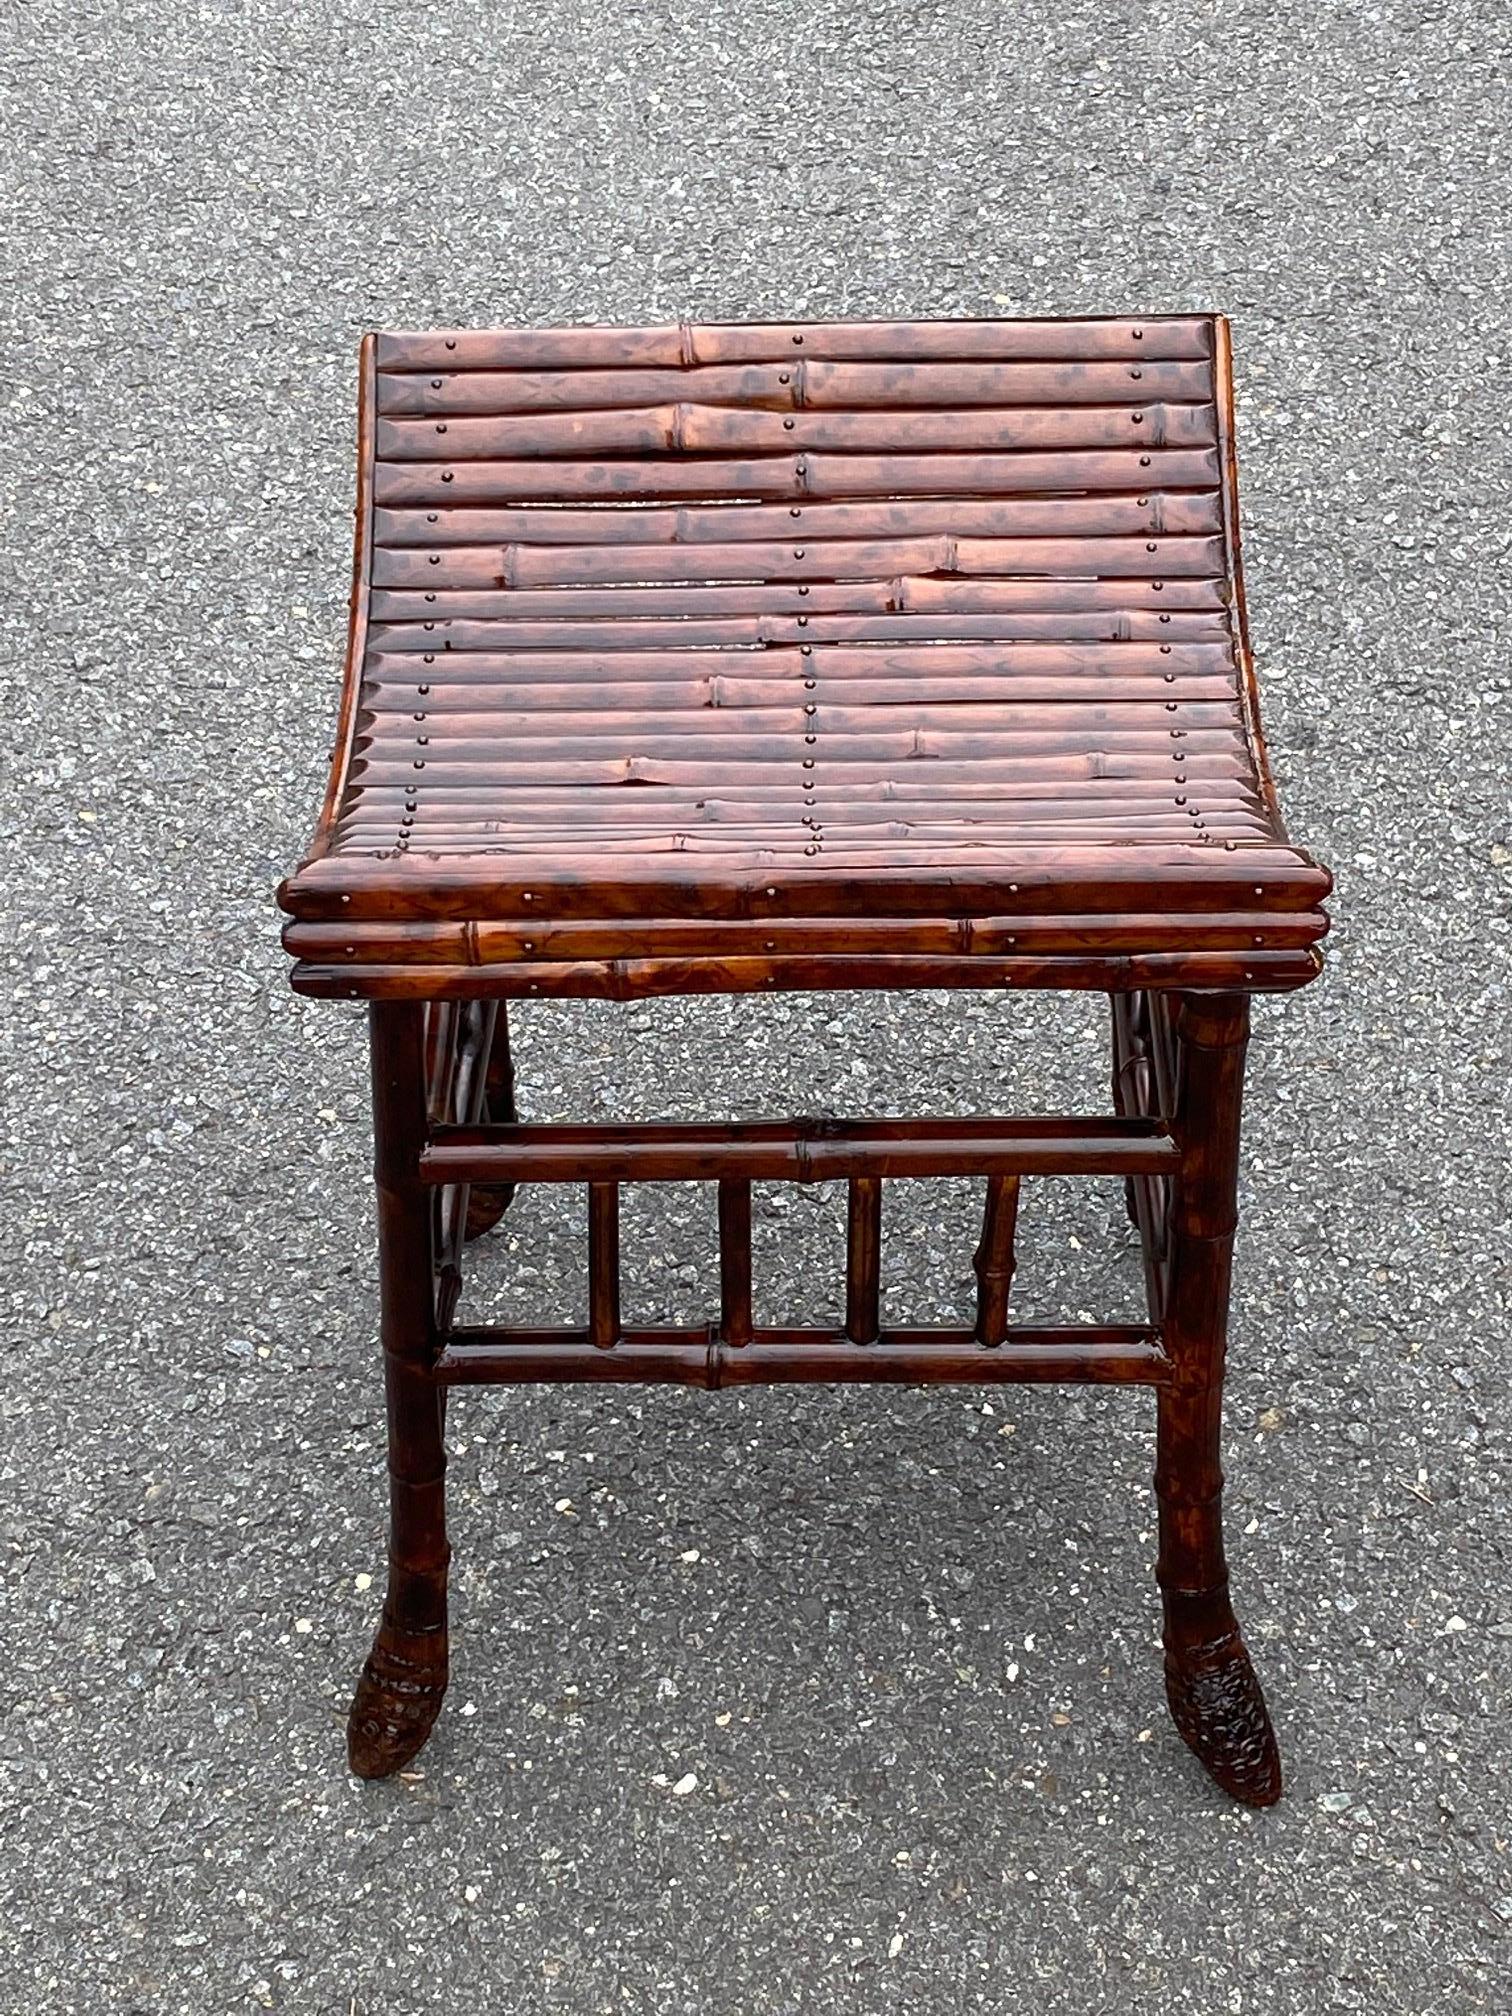 Early 20th Century Handsome English Bamboo Bench or Stool with Faux Tortoise Finish